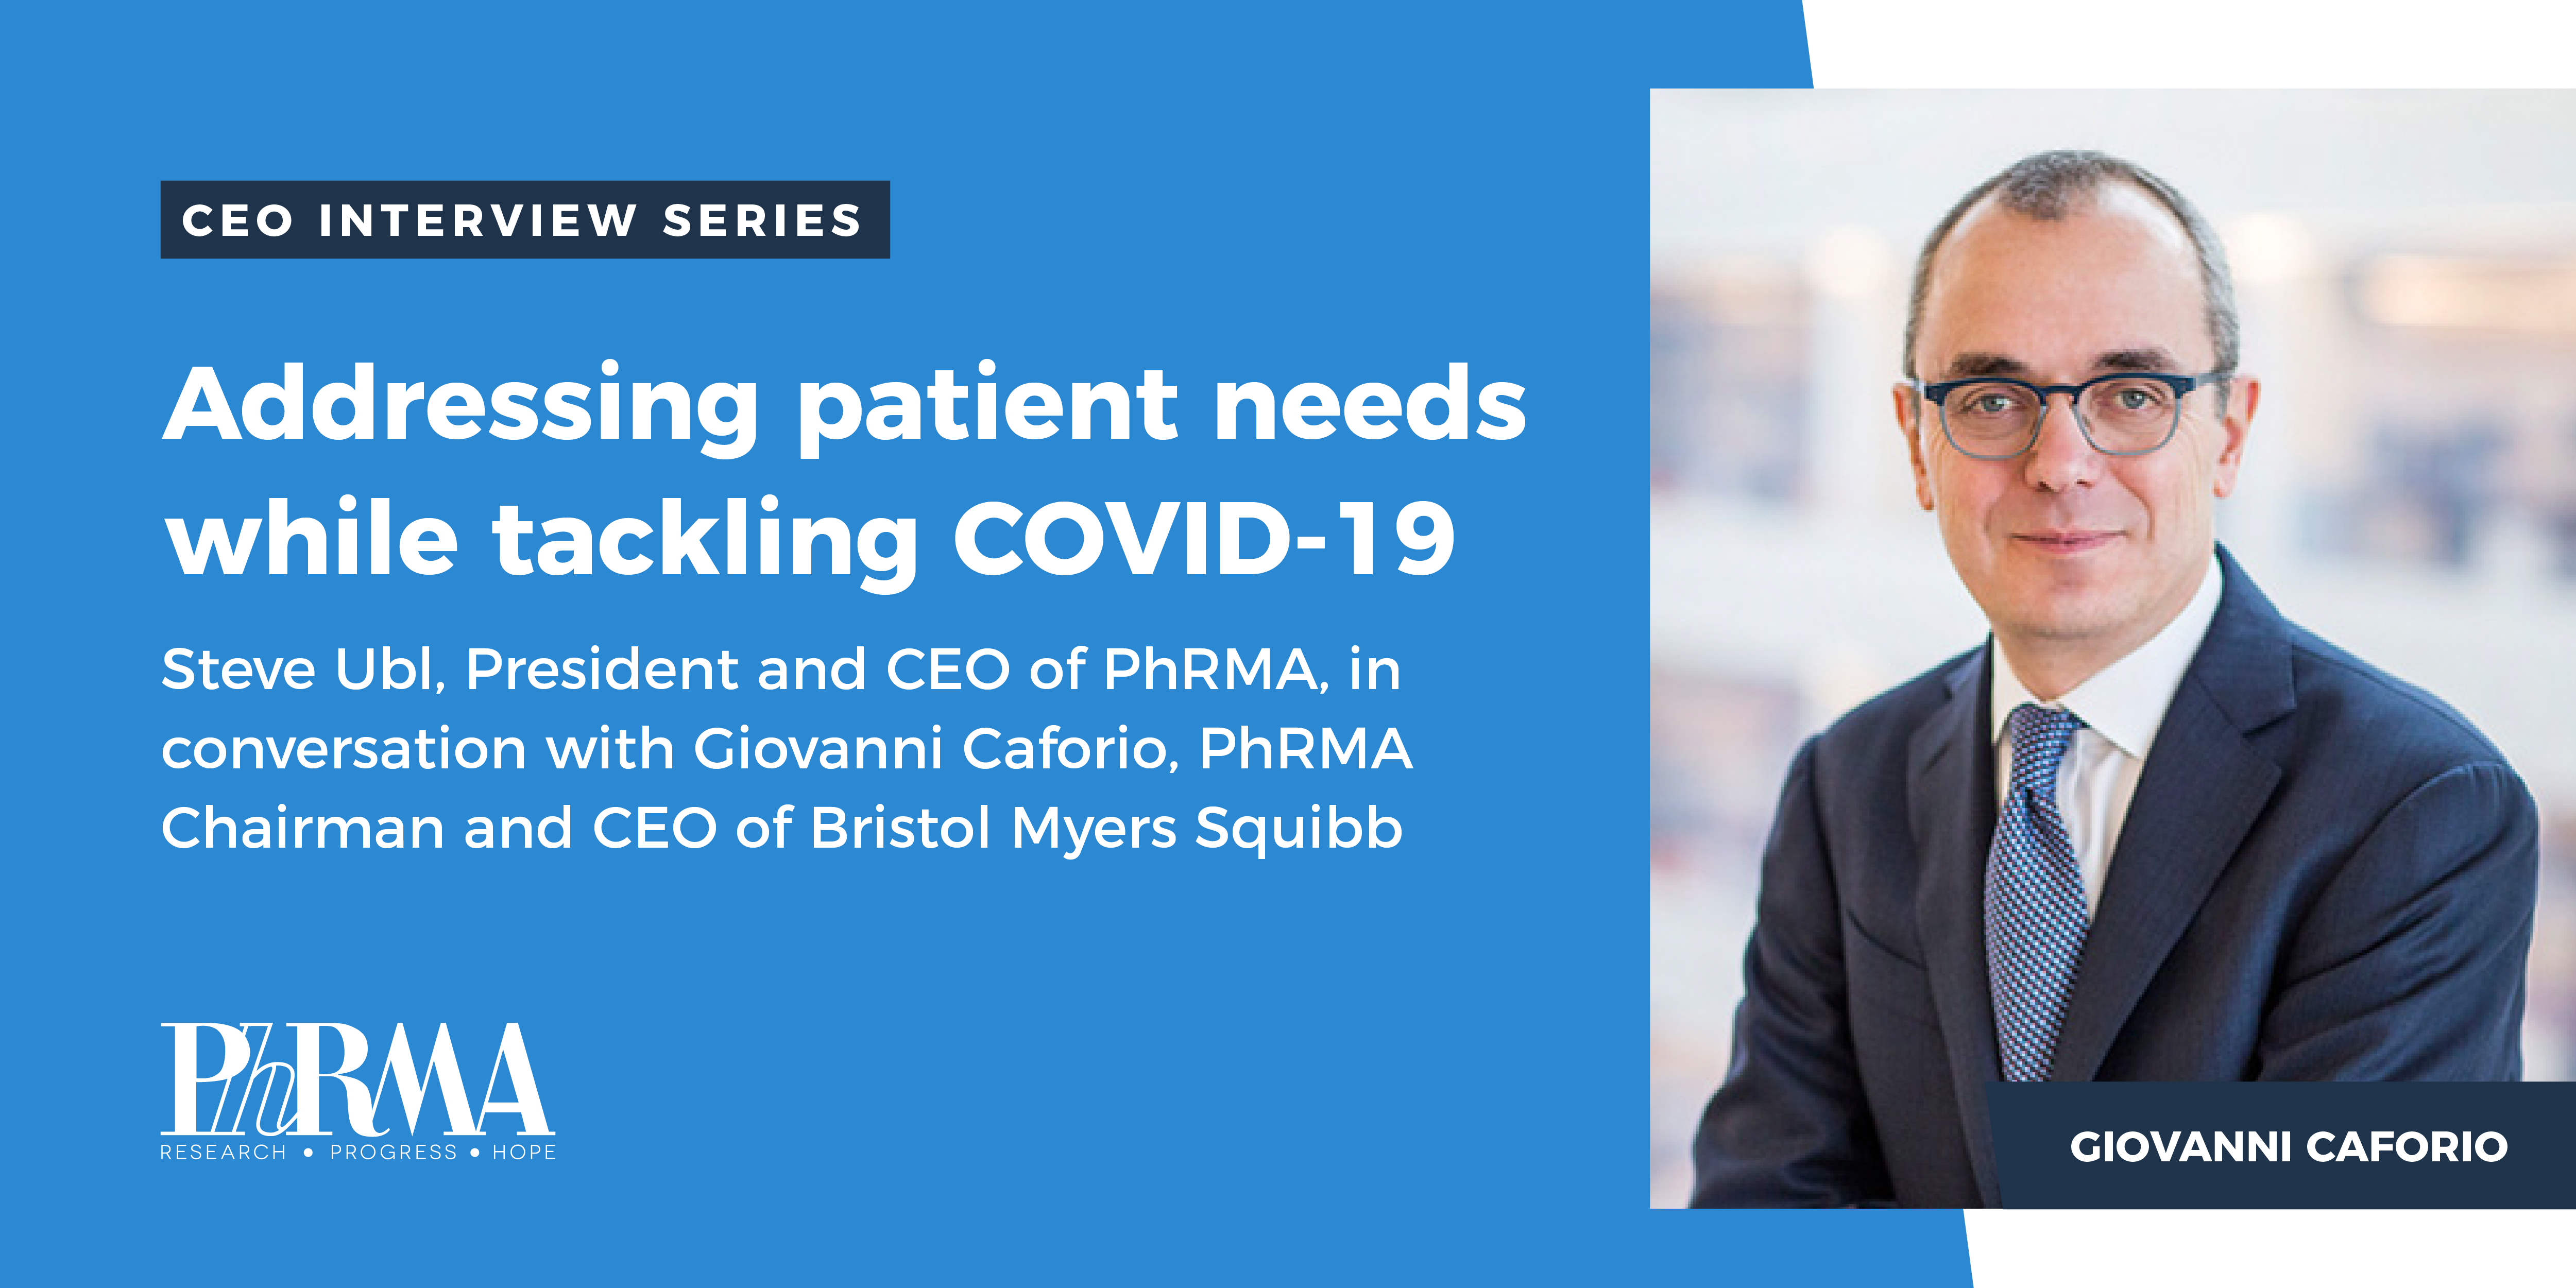 an-unprecedented-year-and-the-road-ahead-a-conversation-with-giovanni-caforio-phrma-chairman-and-ceo-of-bristol-myers-squibb